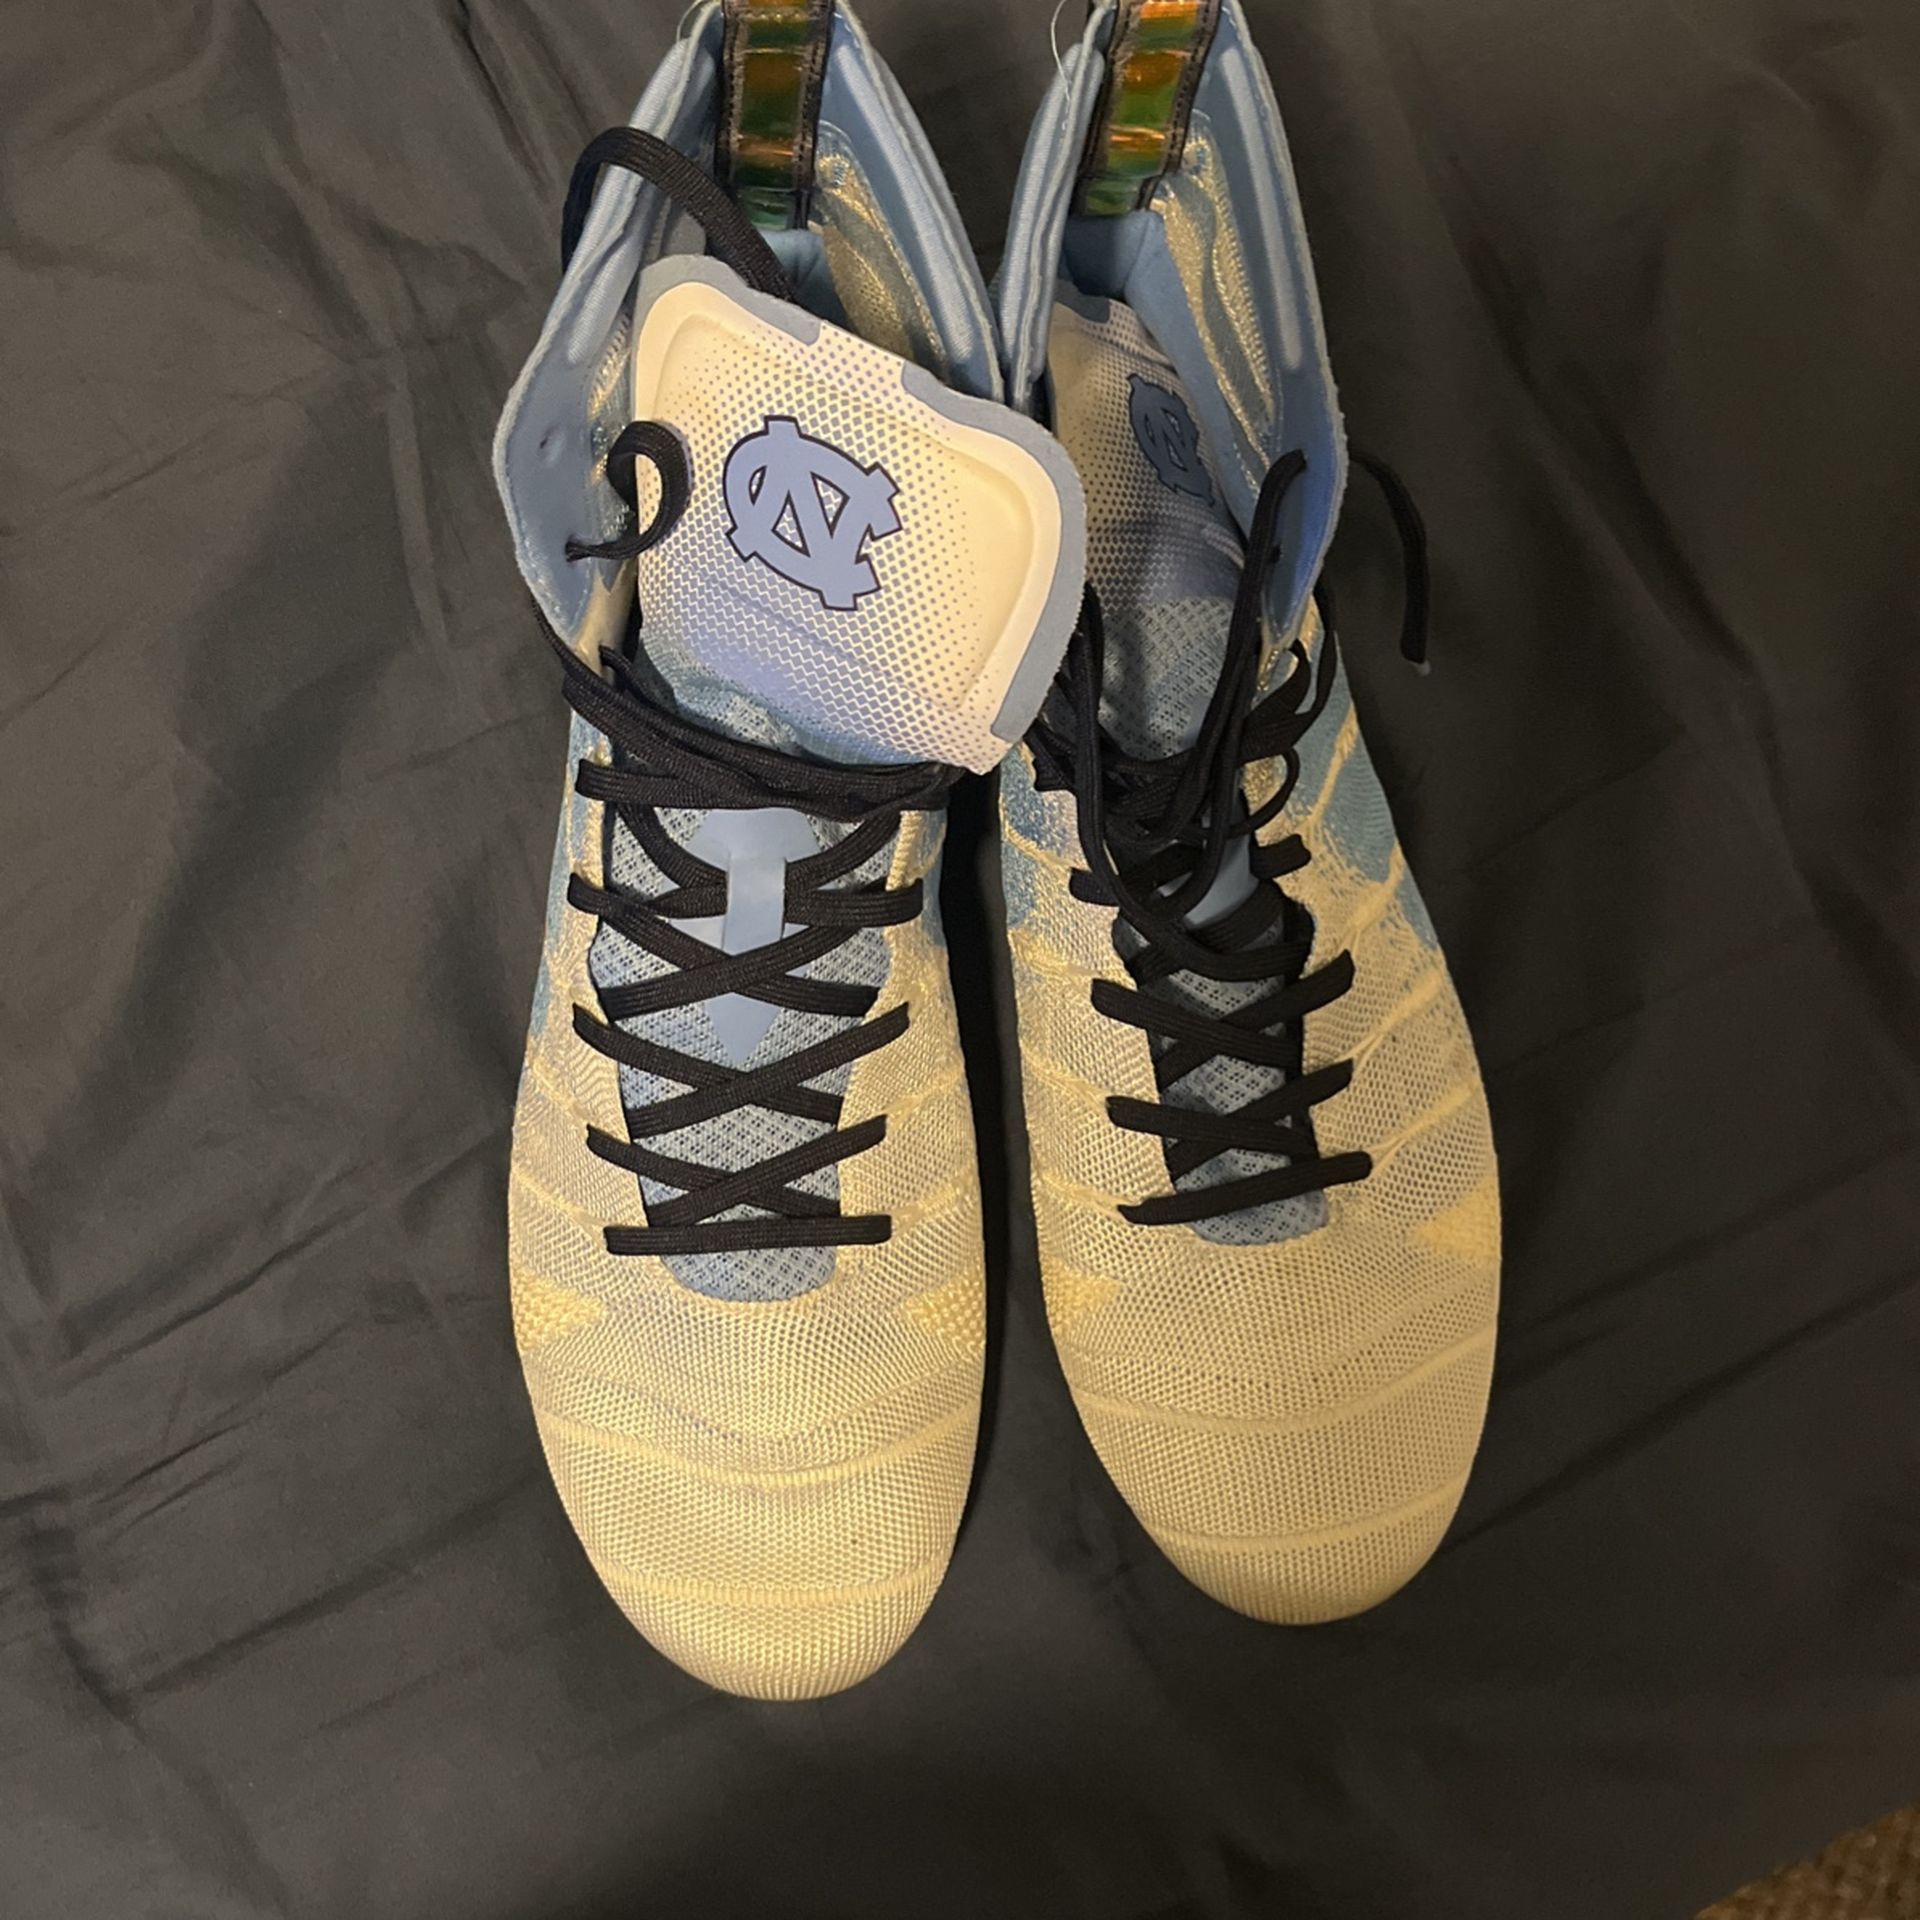 Unc Football Cleats Size 10 Brand New 